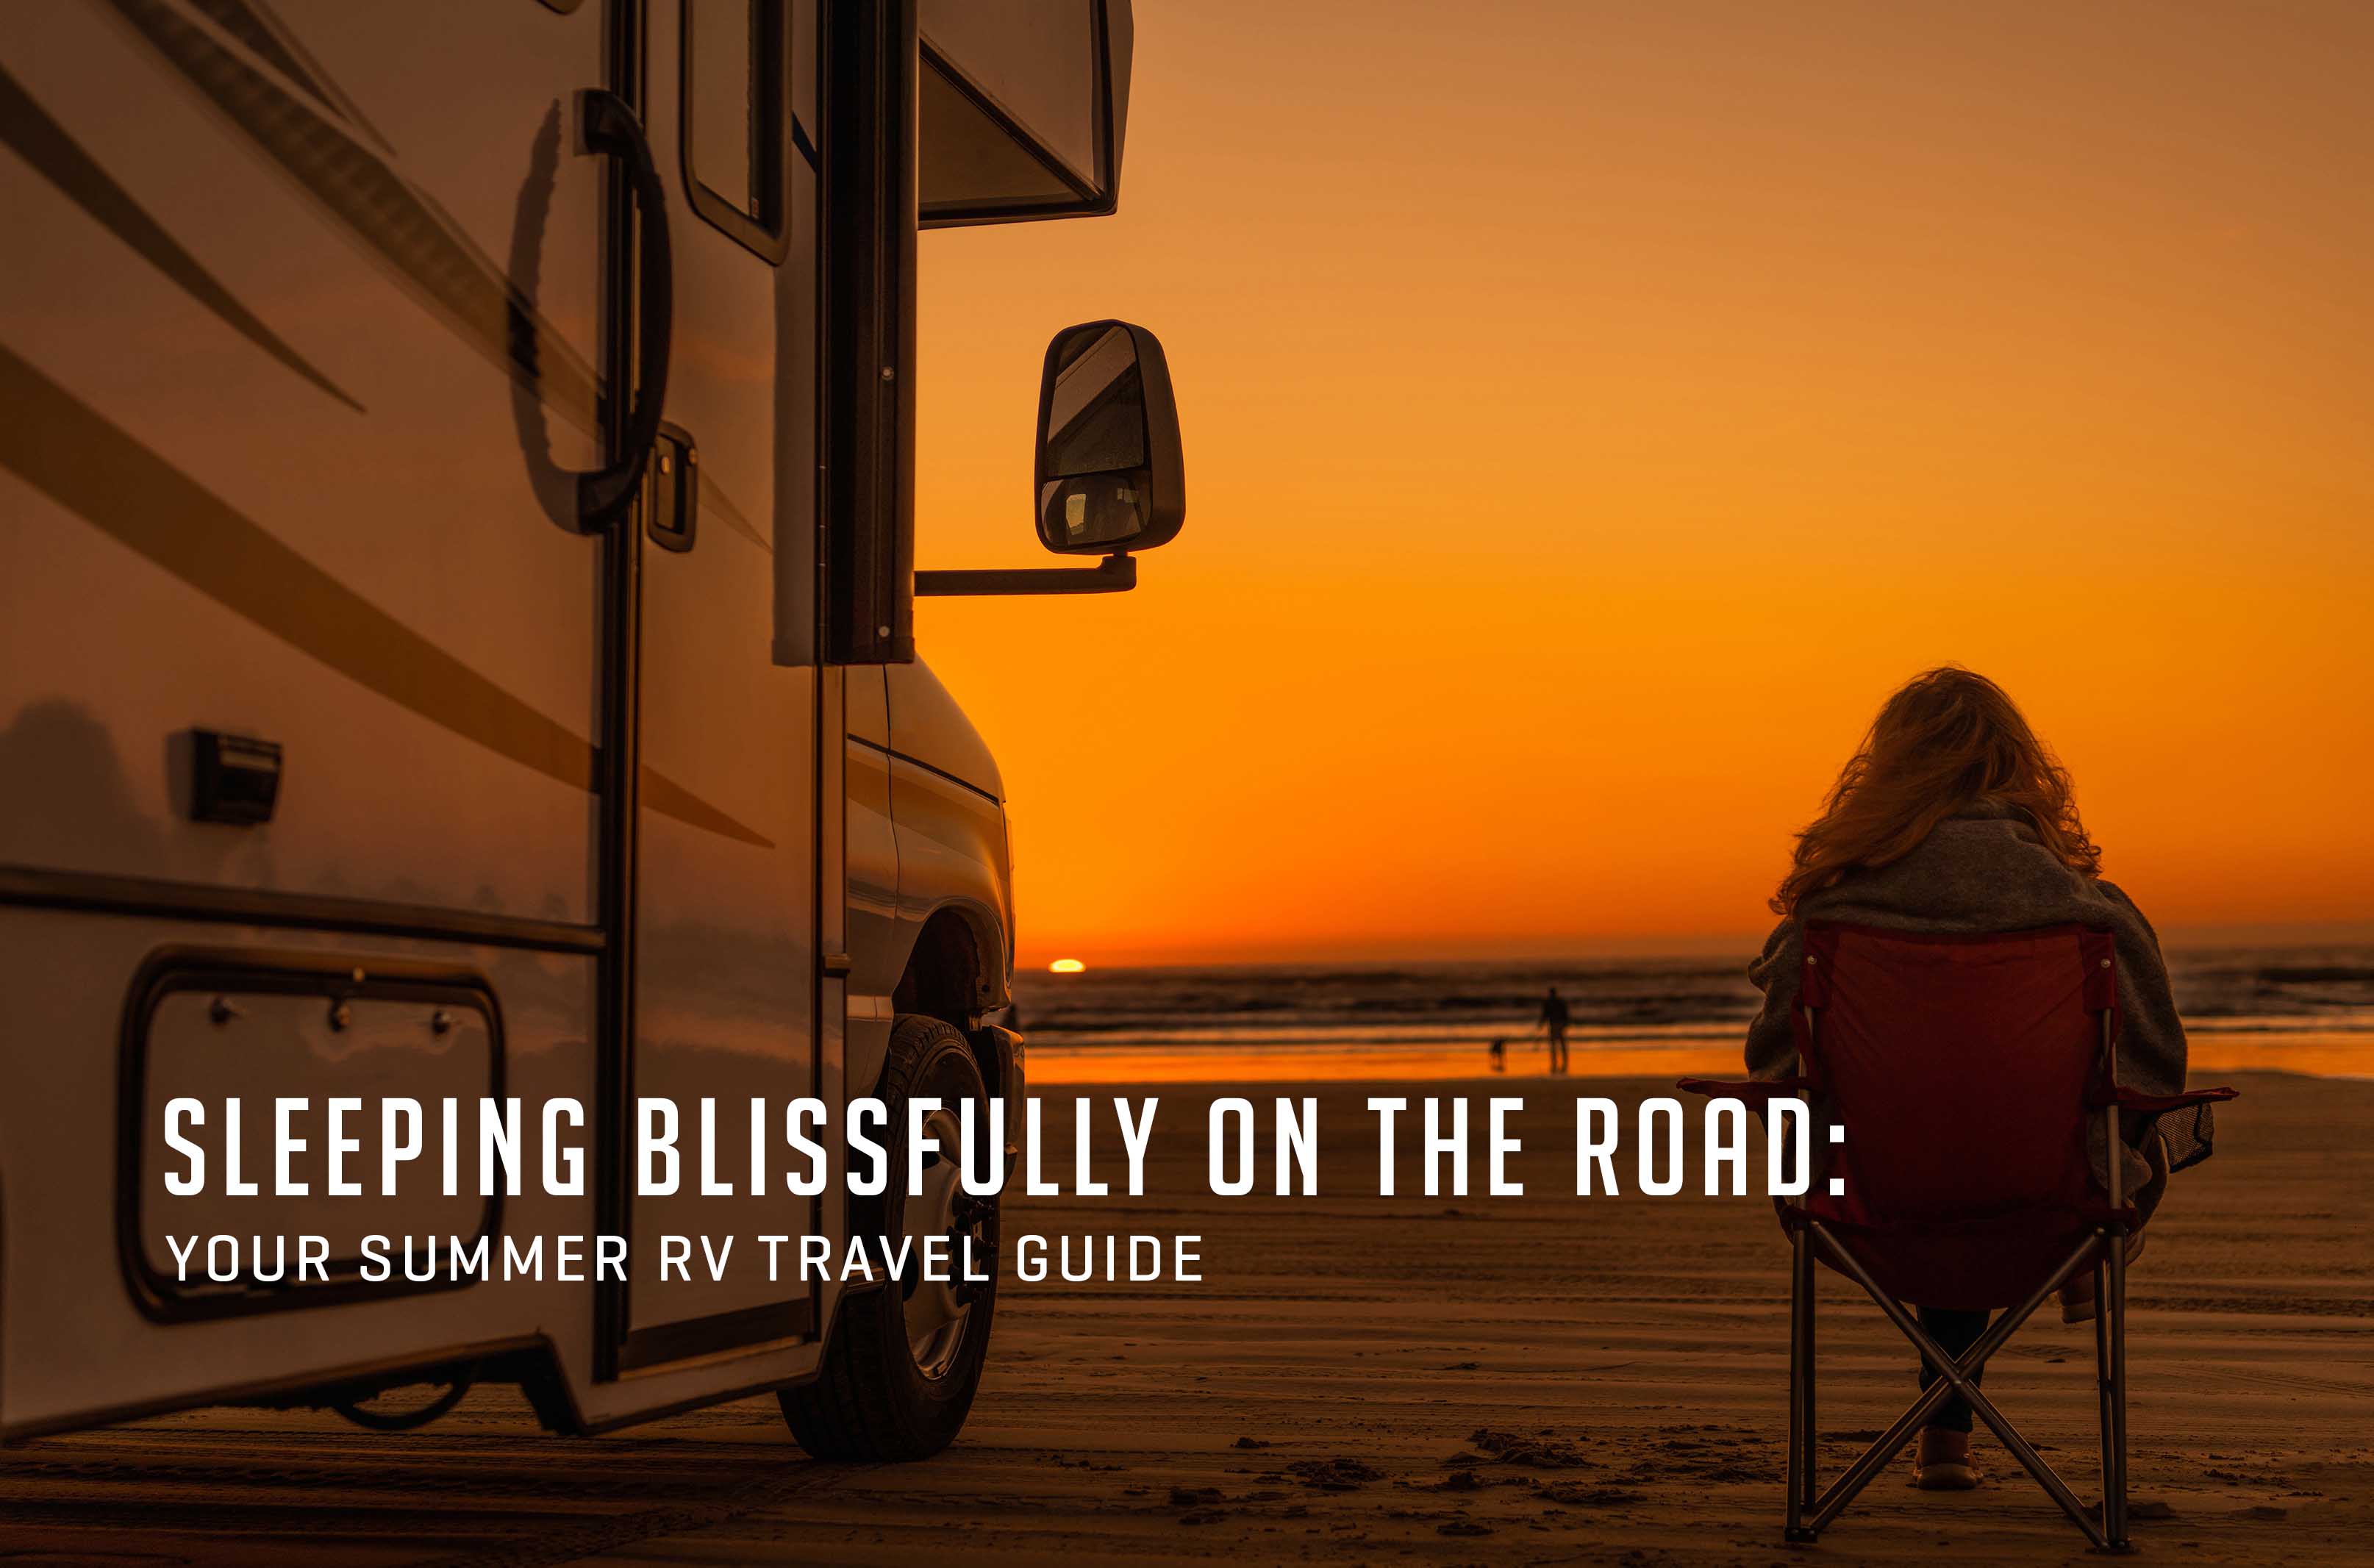 Your Summer RV Travel Guide